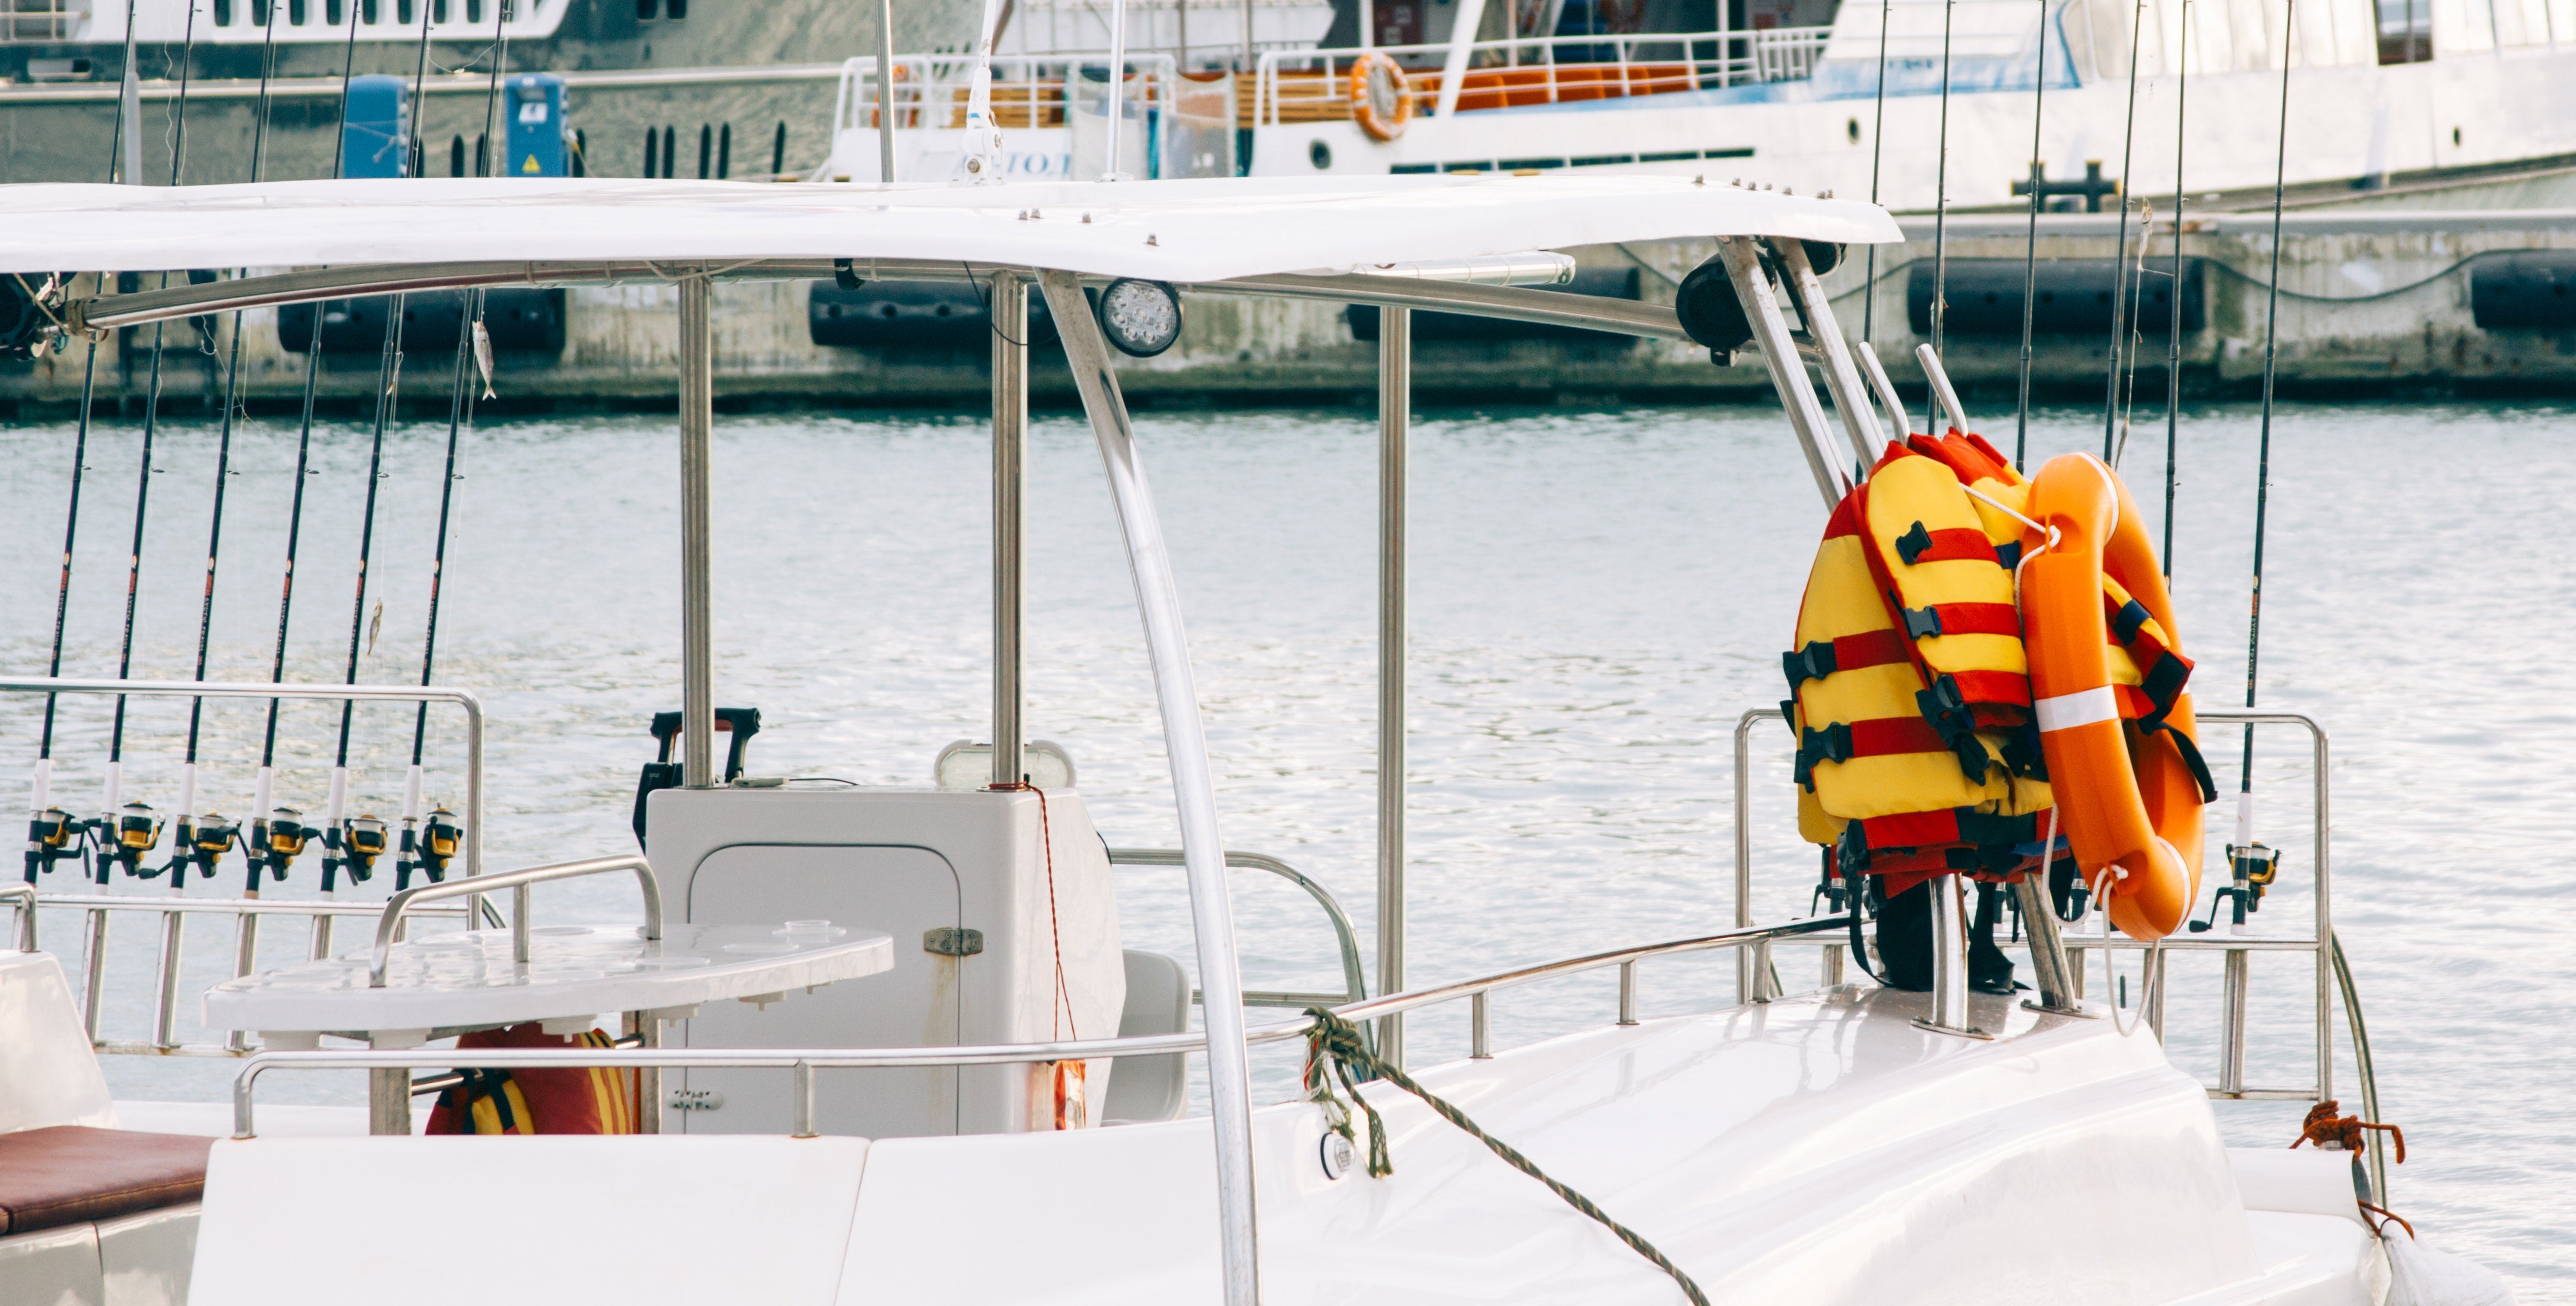 10 essential items to have on a boat